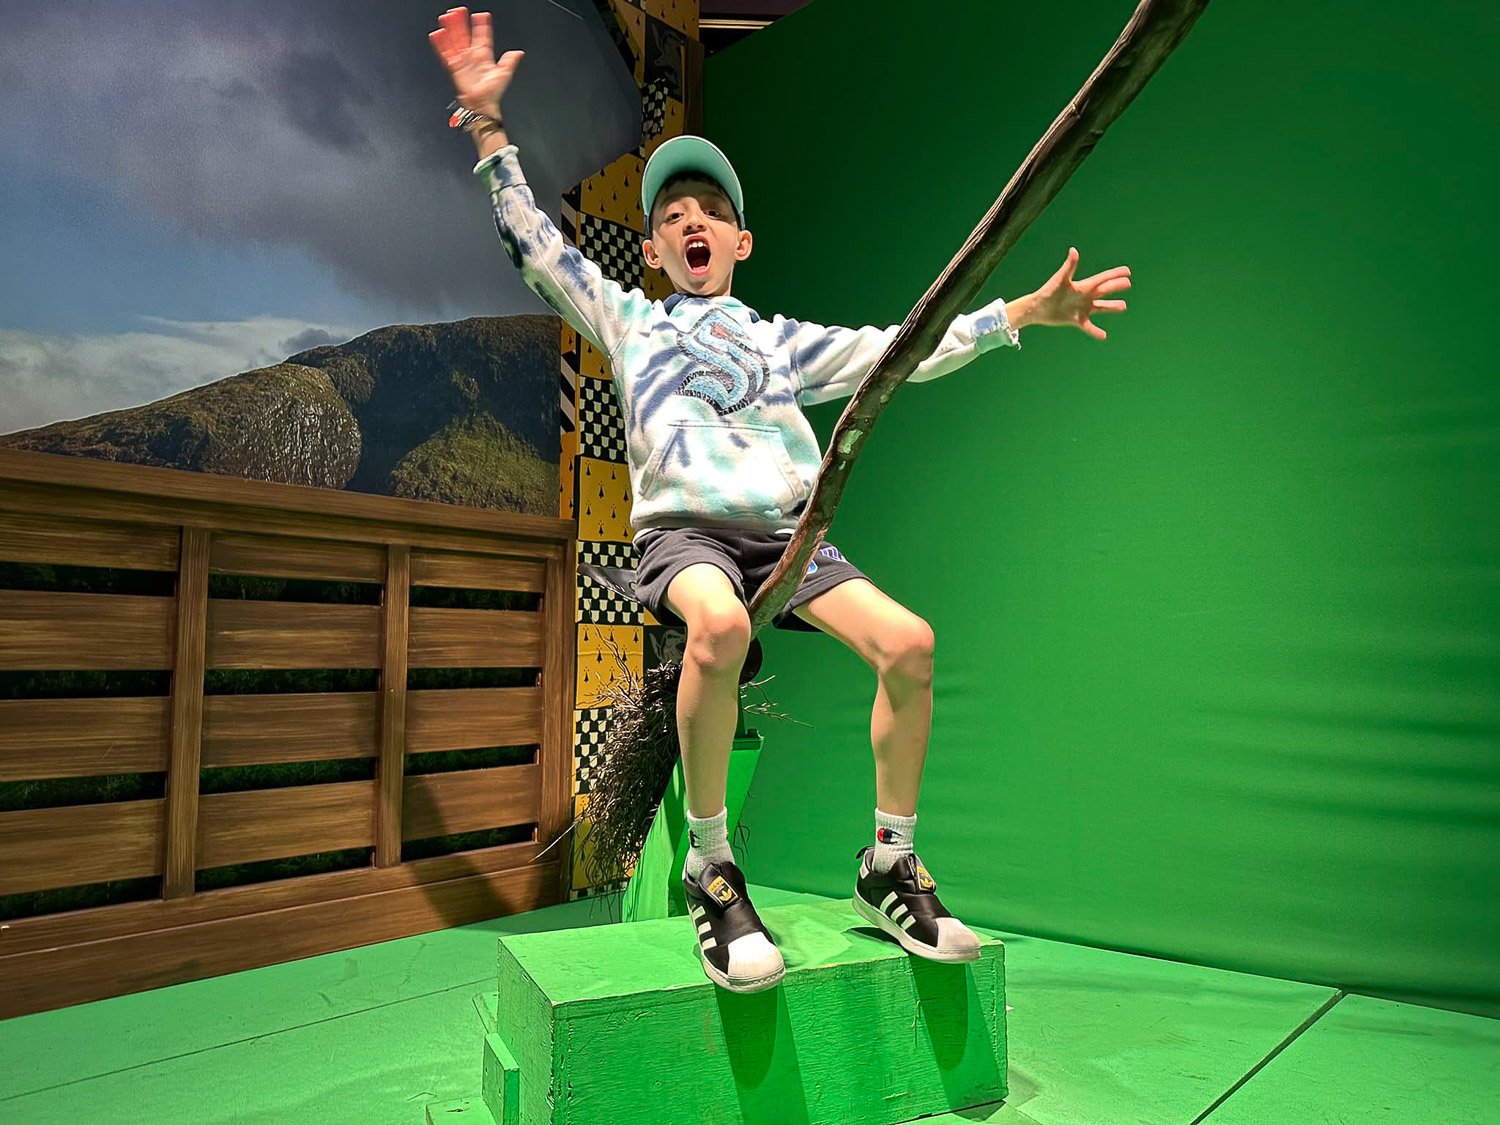 A young boy riding a broomstick in a studio